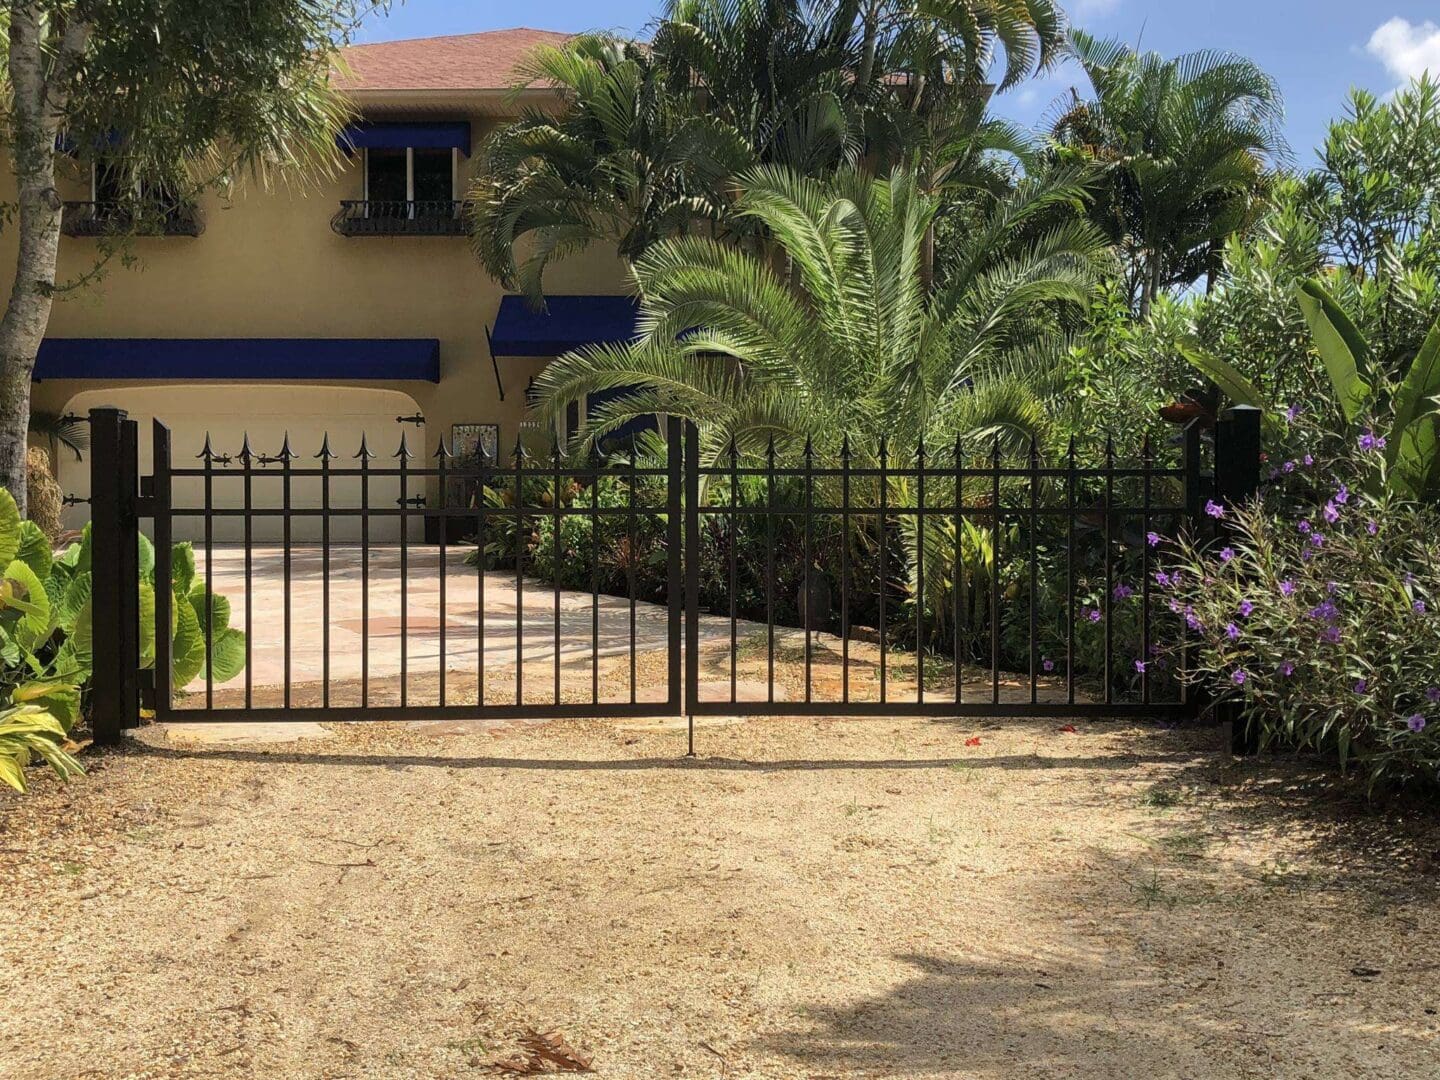 A gated driveway with palm trees and a house in the background.